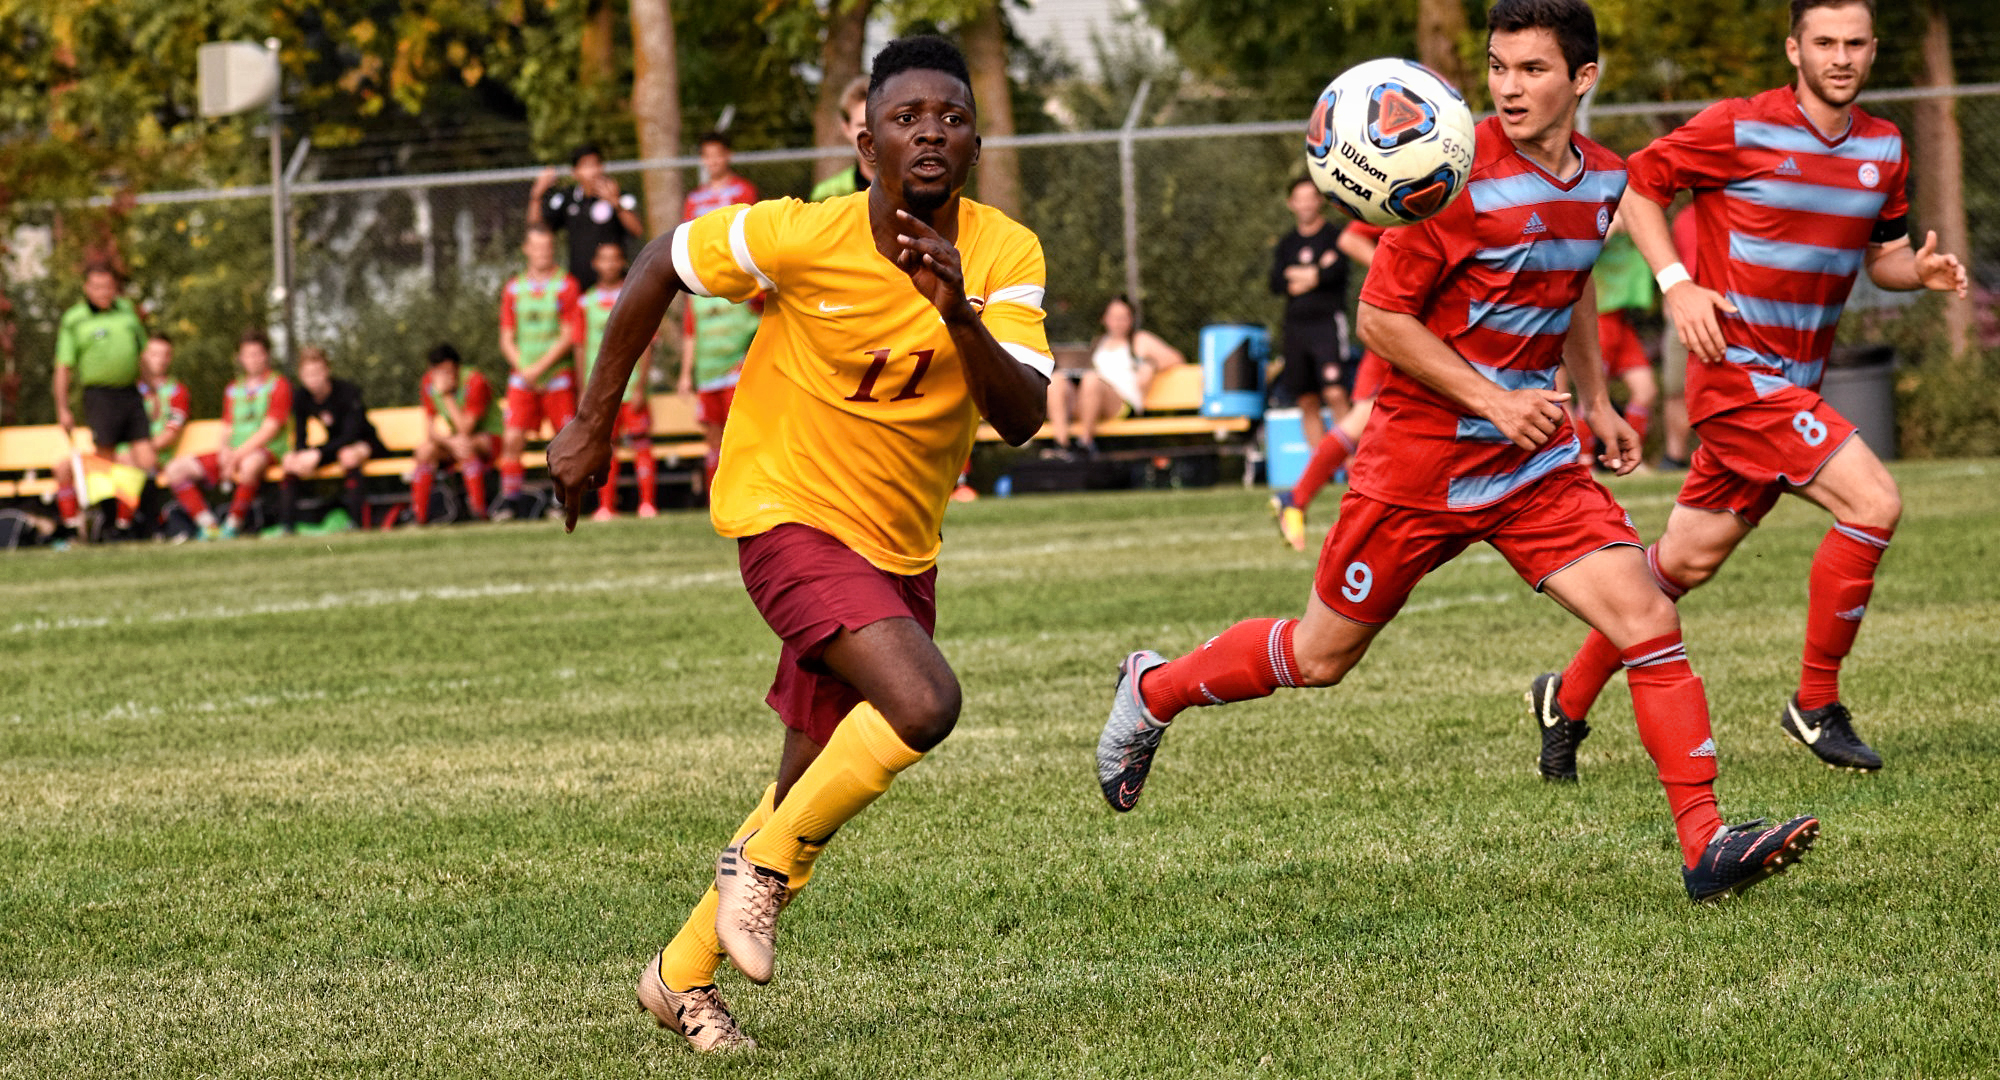 Concordia senior Roland Oyou scored the Cobbers' lone goal in their game at Gustavus. (Photo courtesy of Maddy Reed)